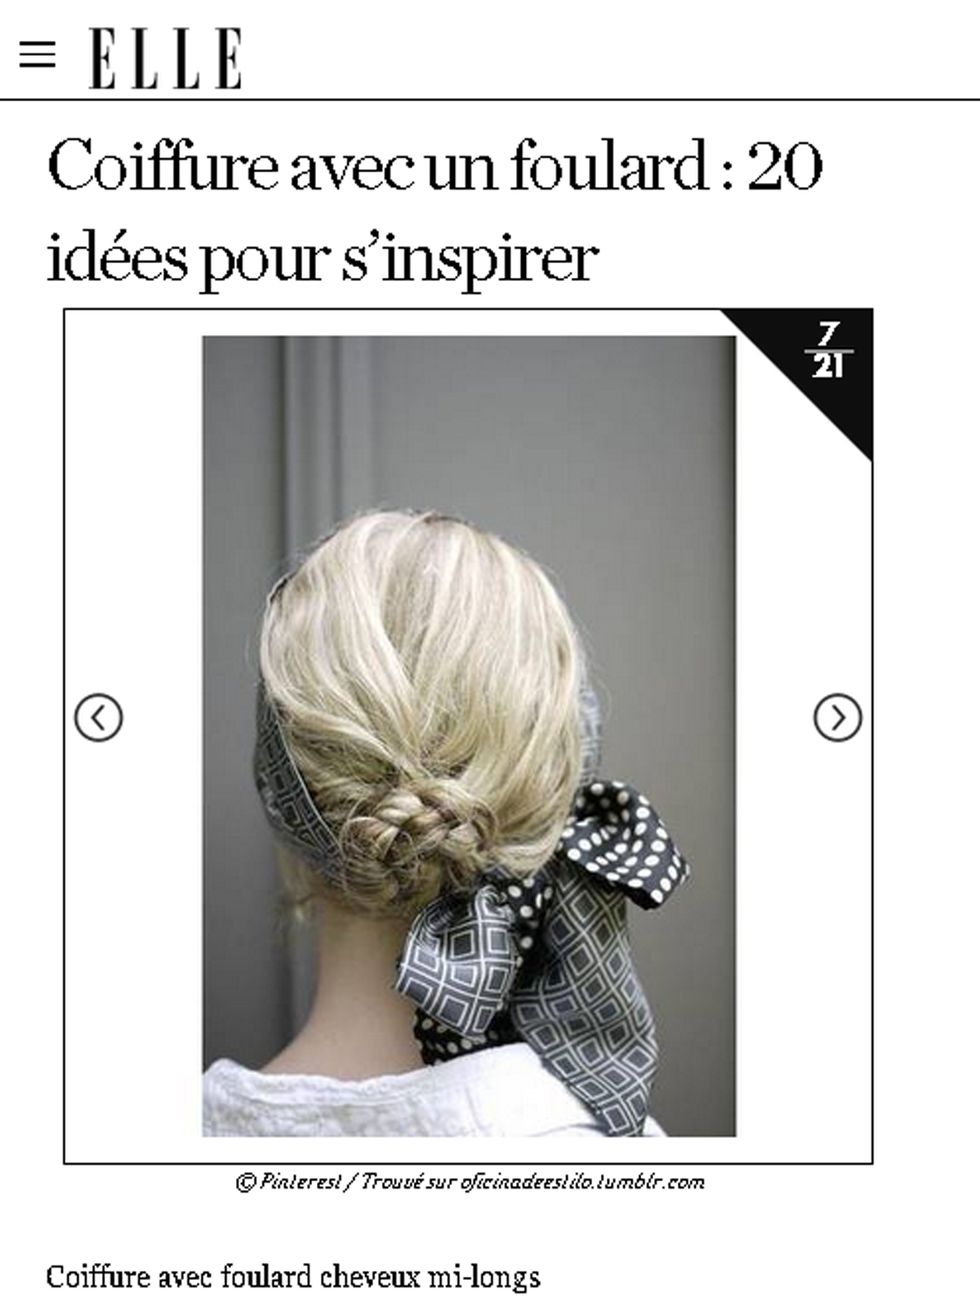 Hairstyle, Text, Style, Back, Long hair, Photo caption, Silver, Chignon, Hair accessory, Artificial hair integrations, 